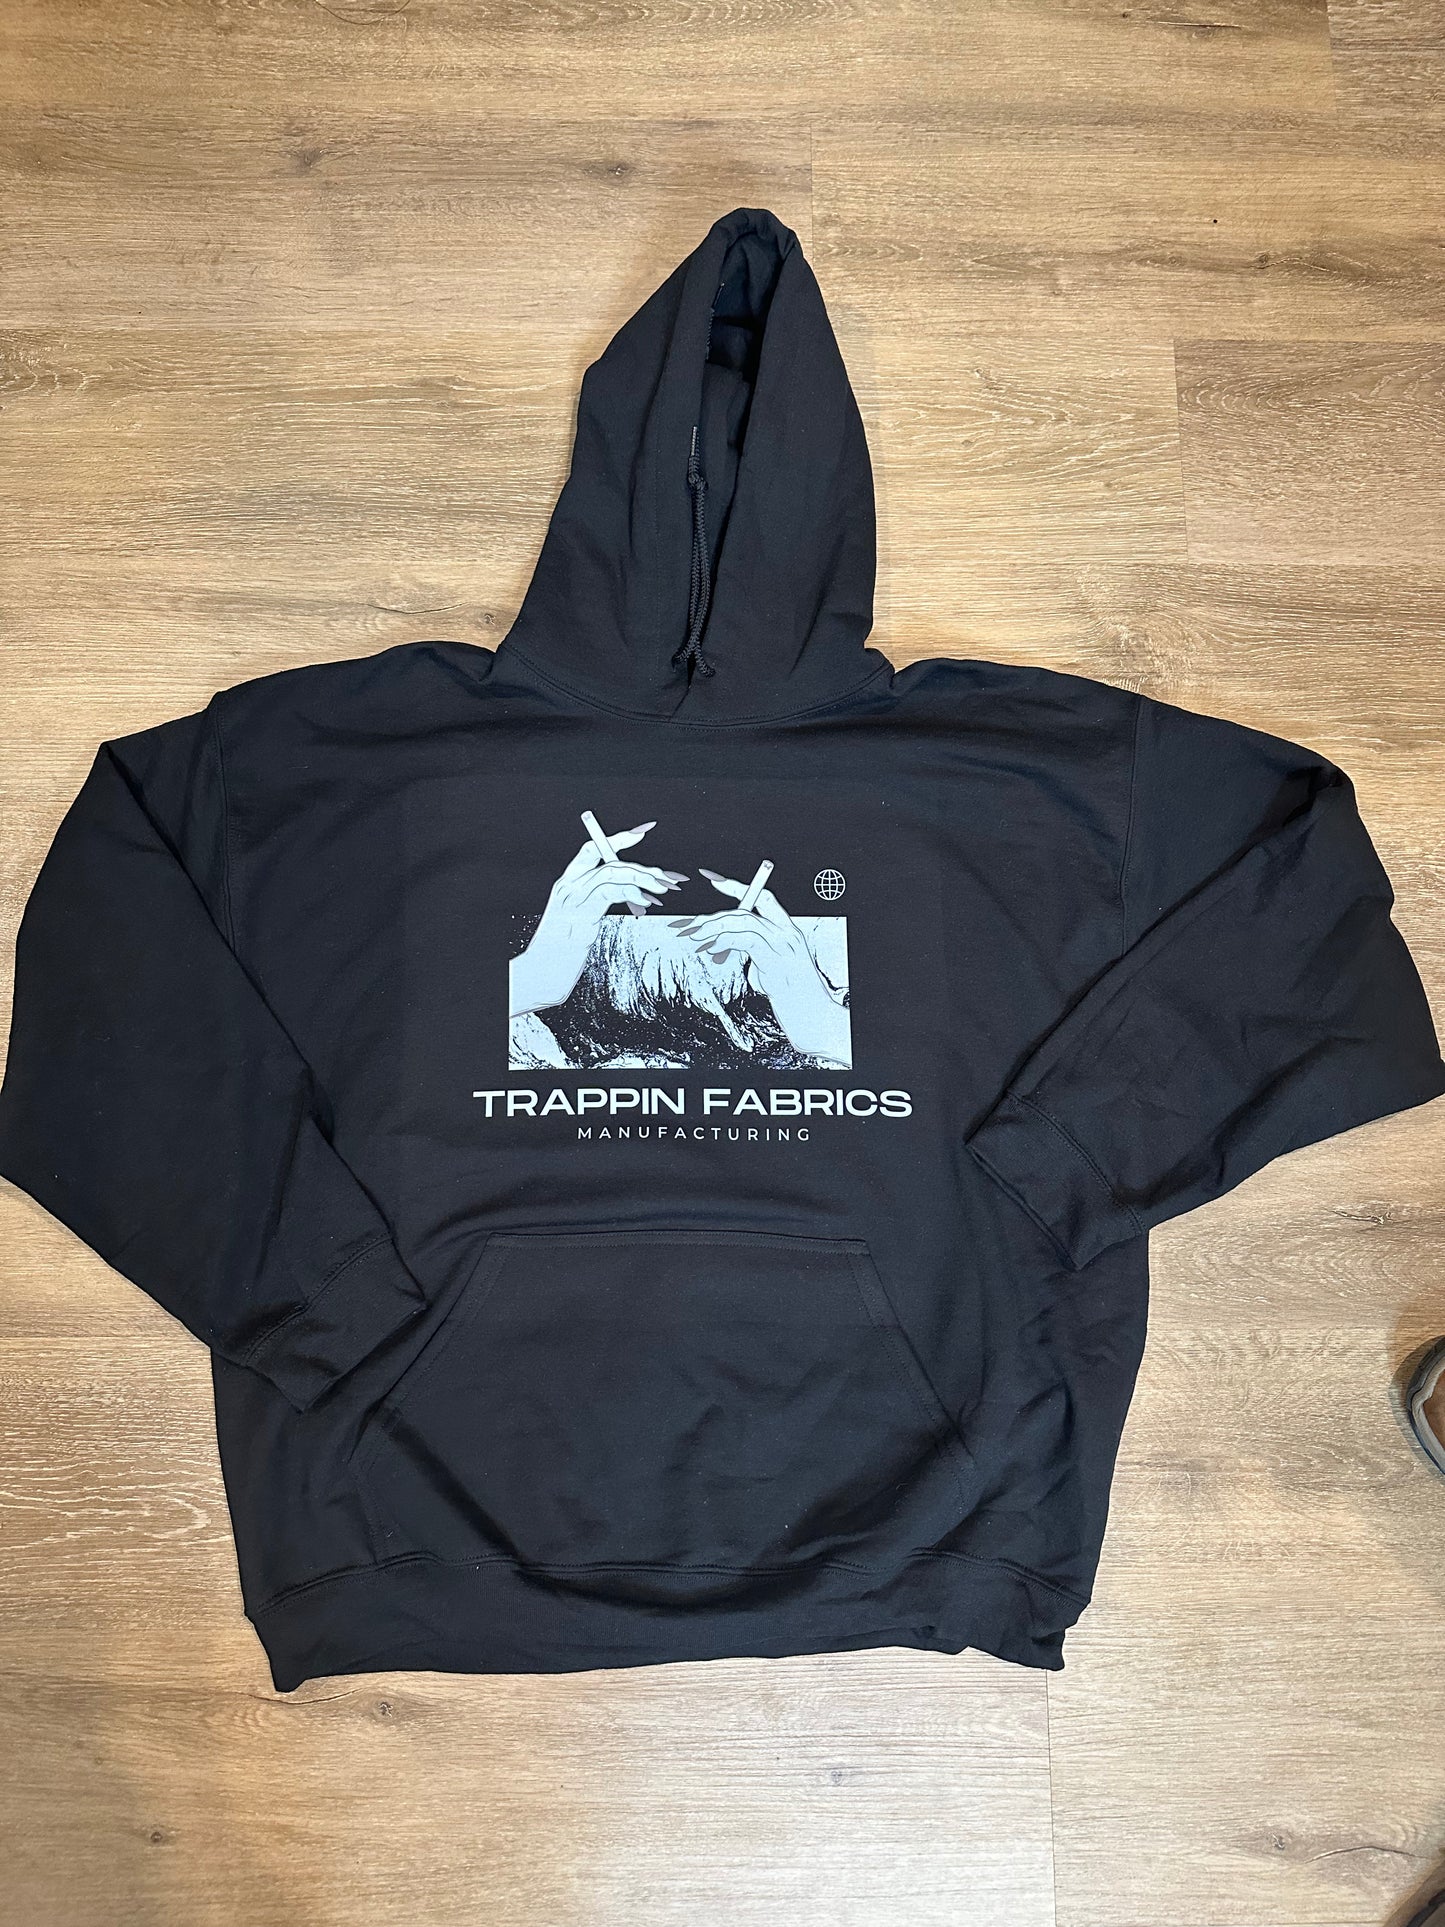 Trappin’ Fabrics Graphic T Shirt/Hoodie